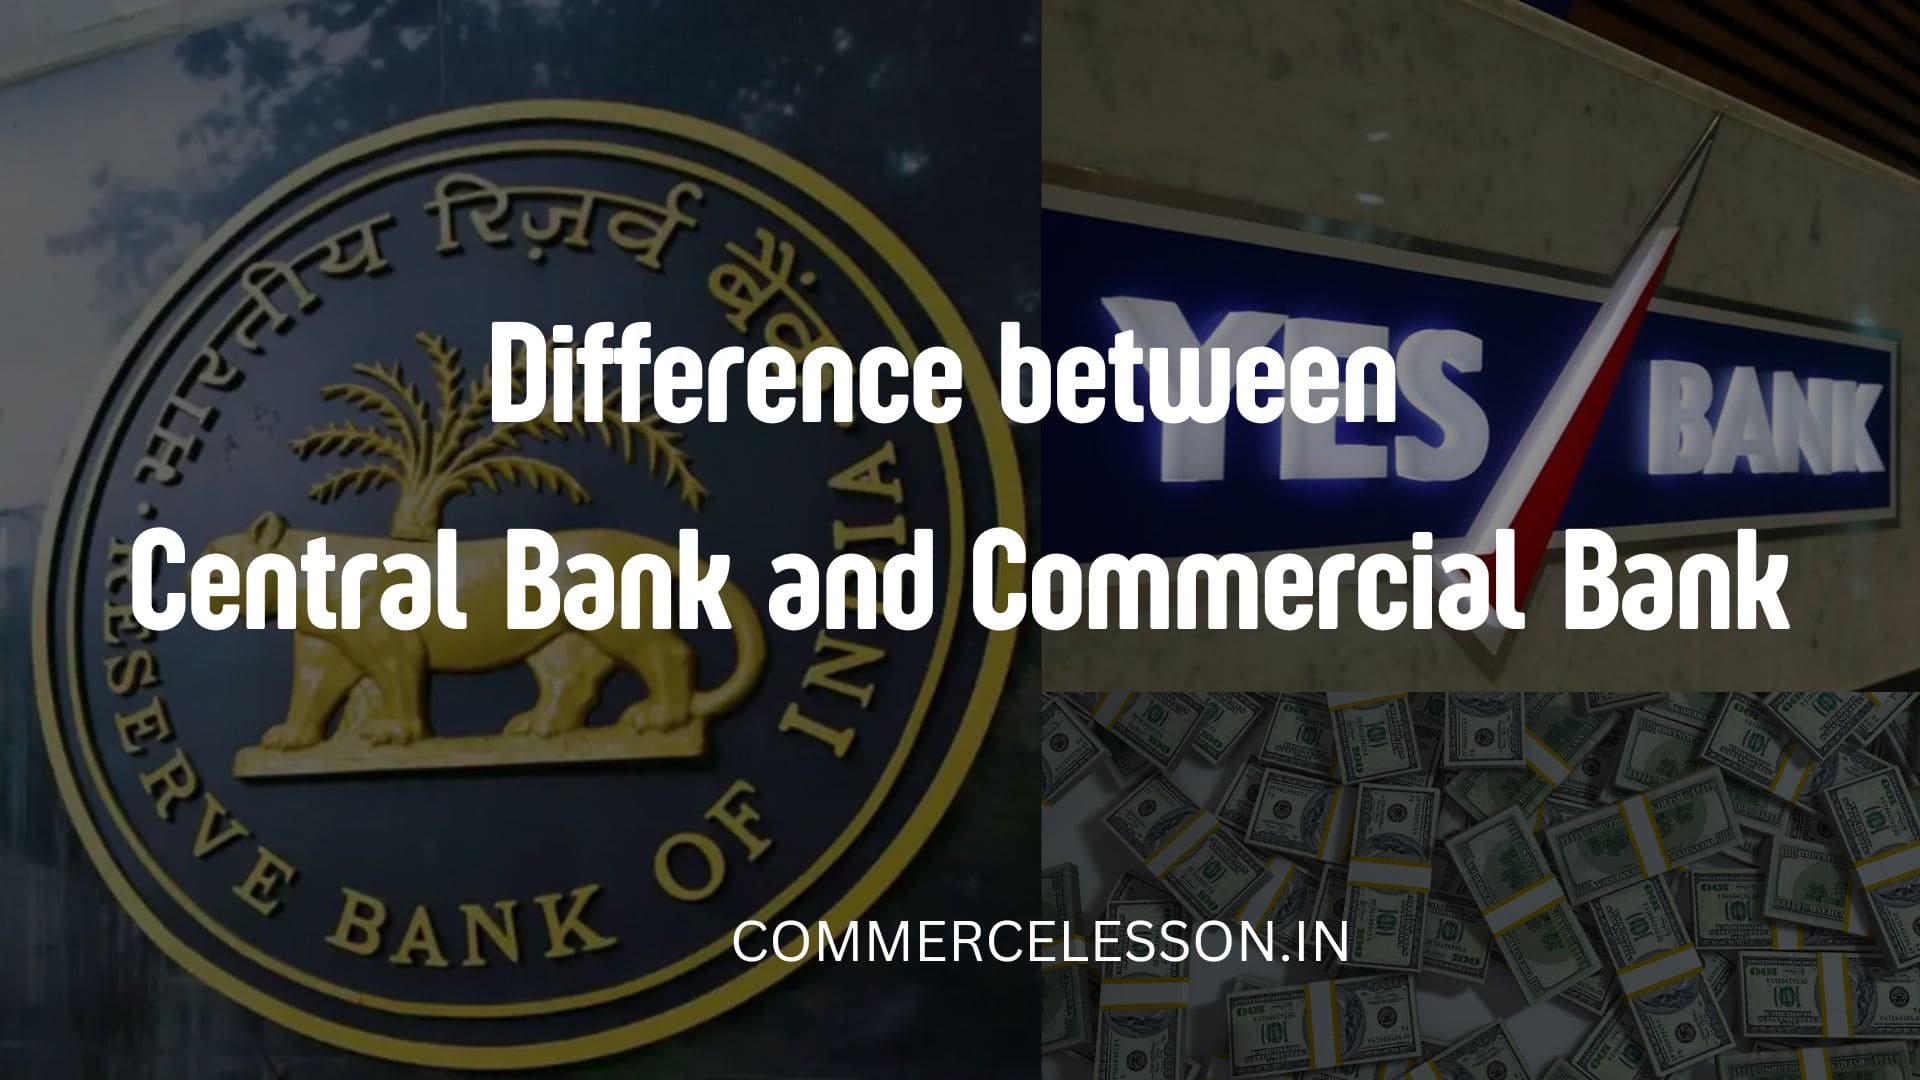 Difference between Central Bank and Commercial Bank